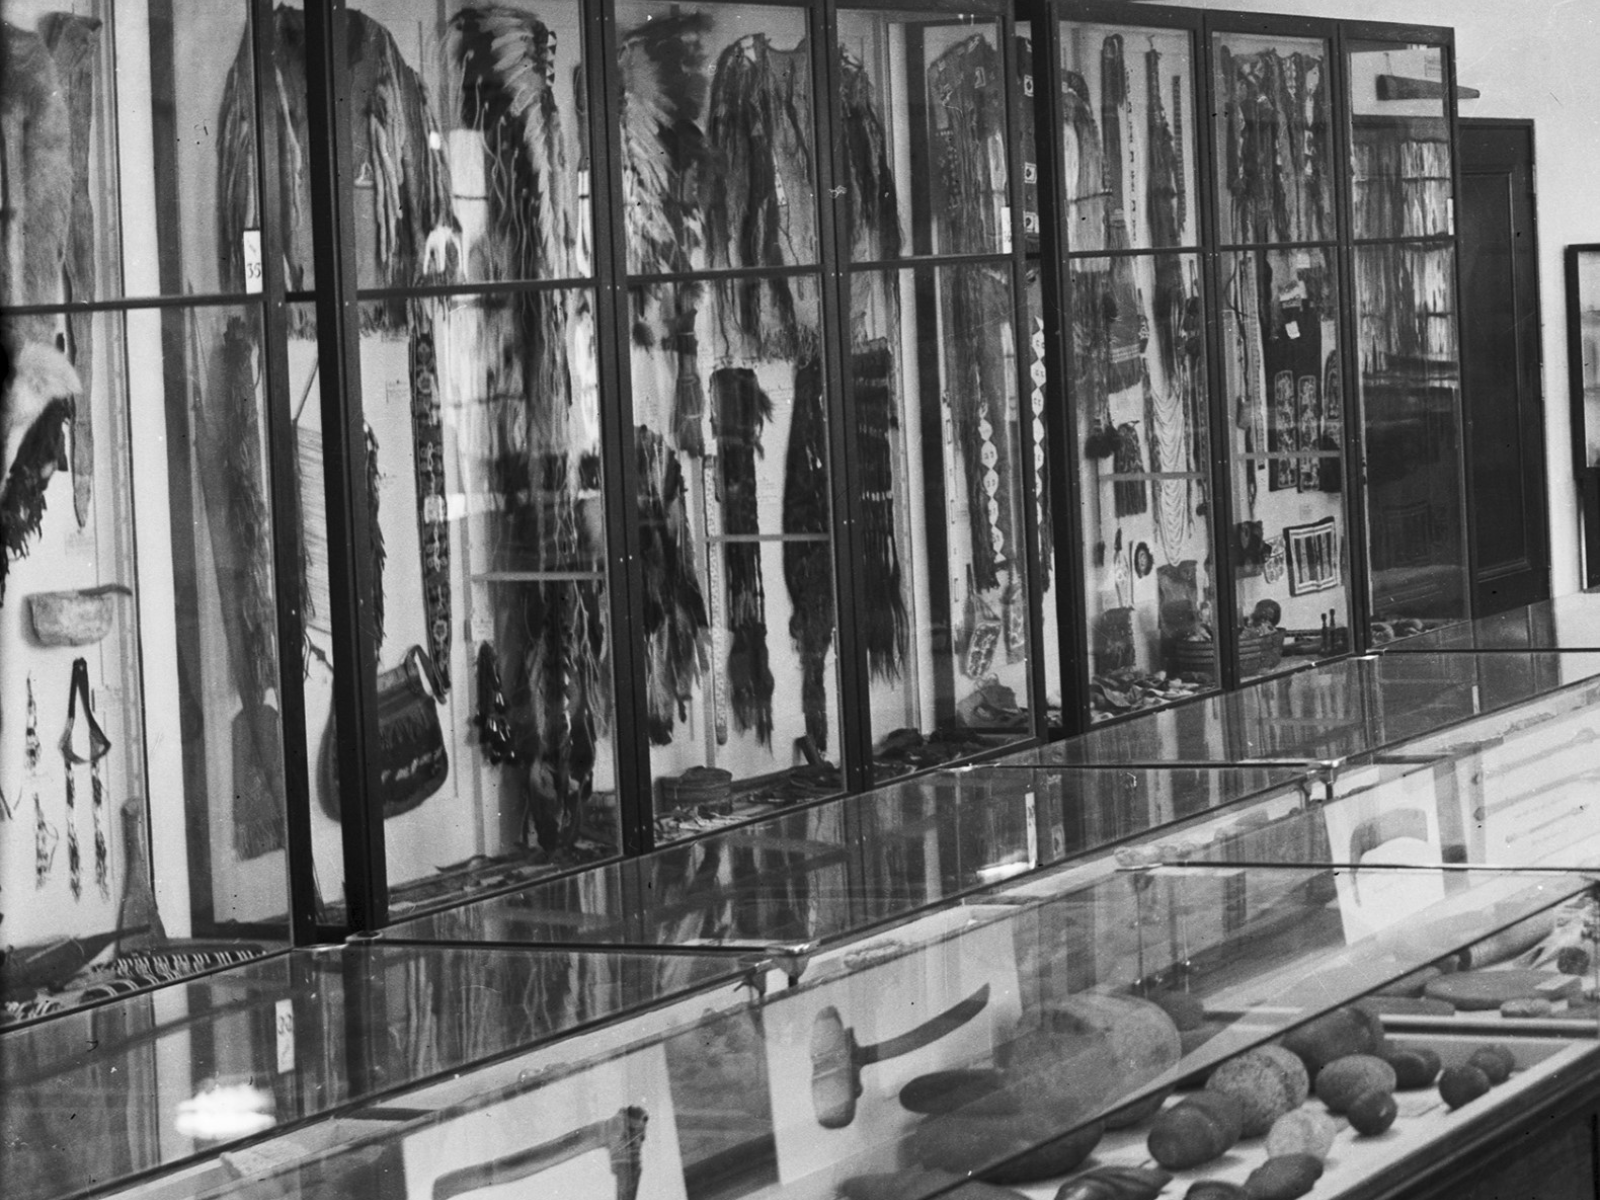 Black and white image of museum display cases showcasing various Indigenous artifacts, including a kayak.